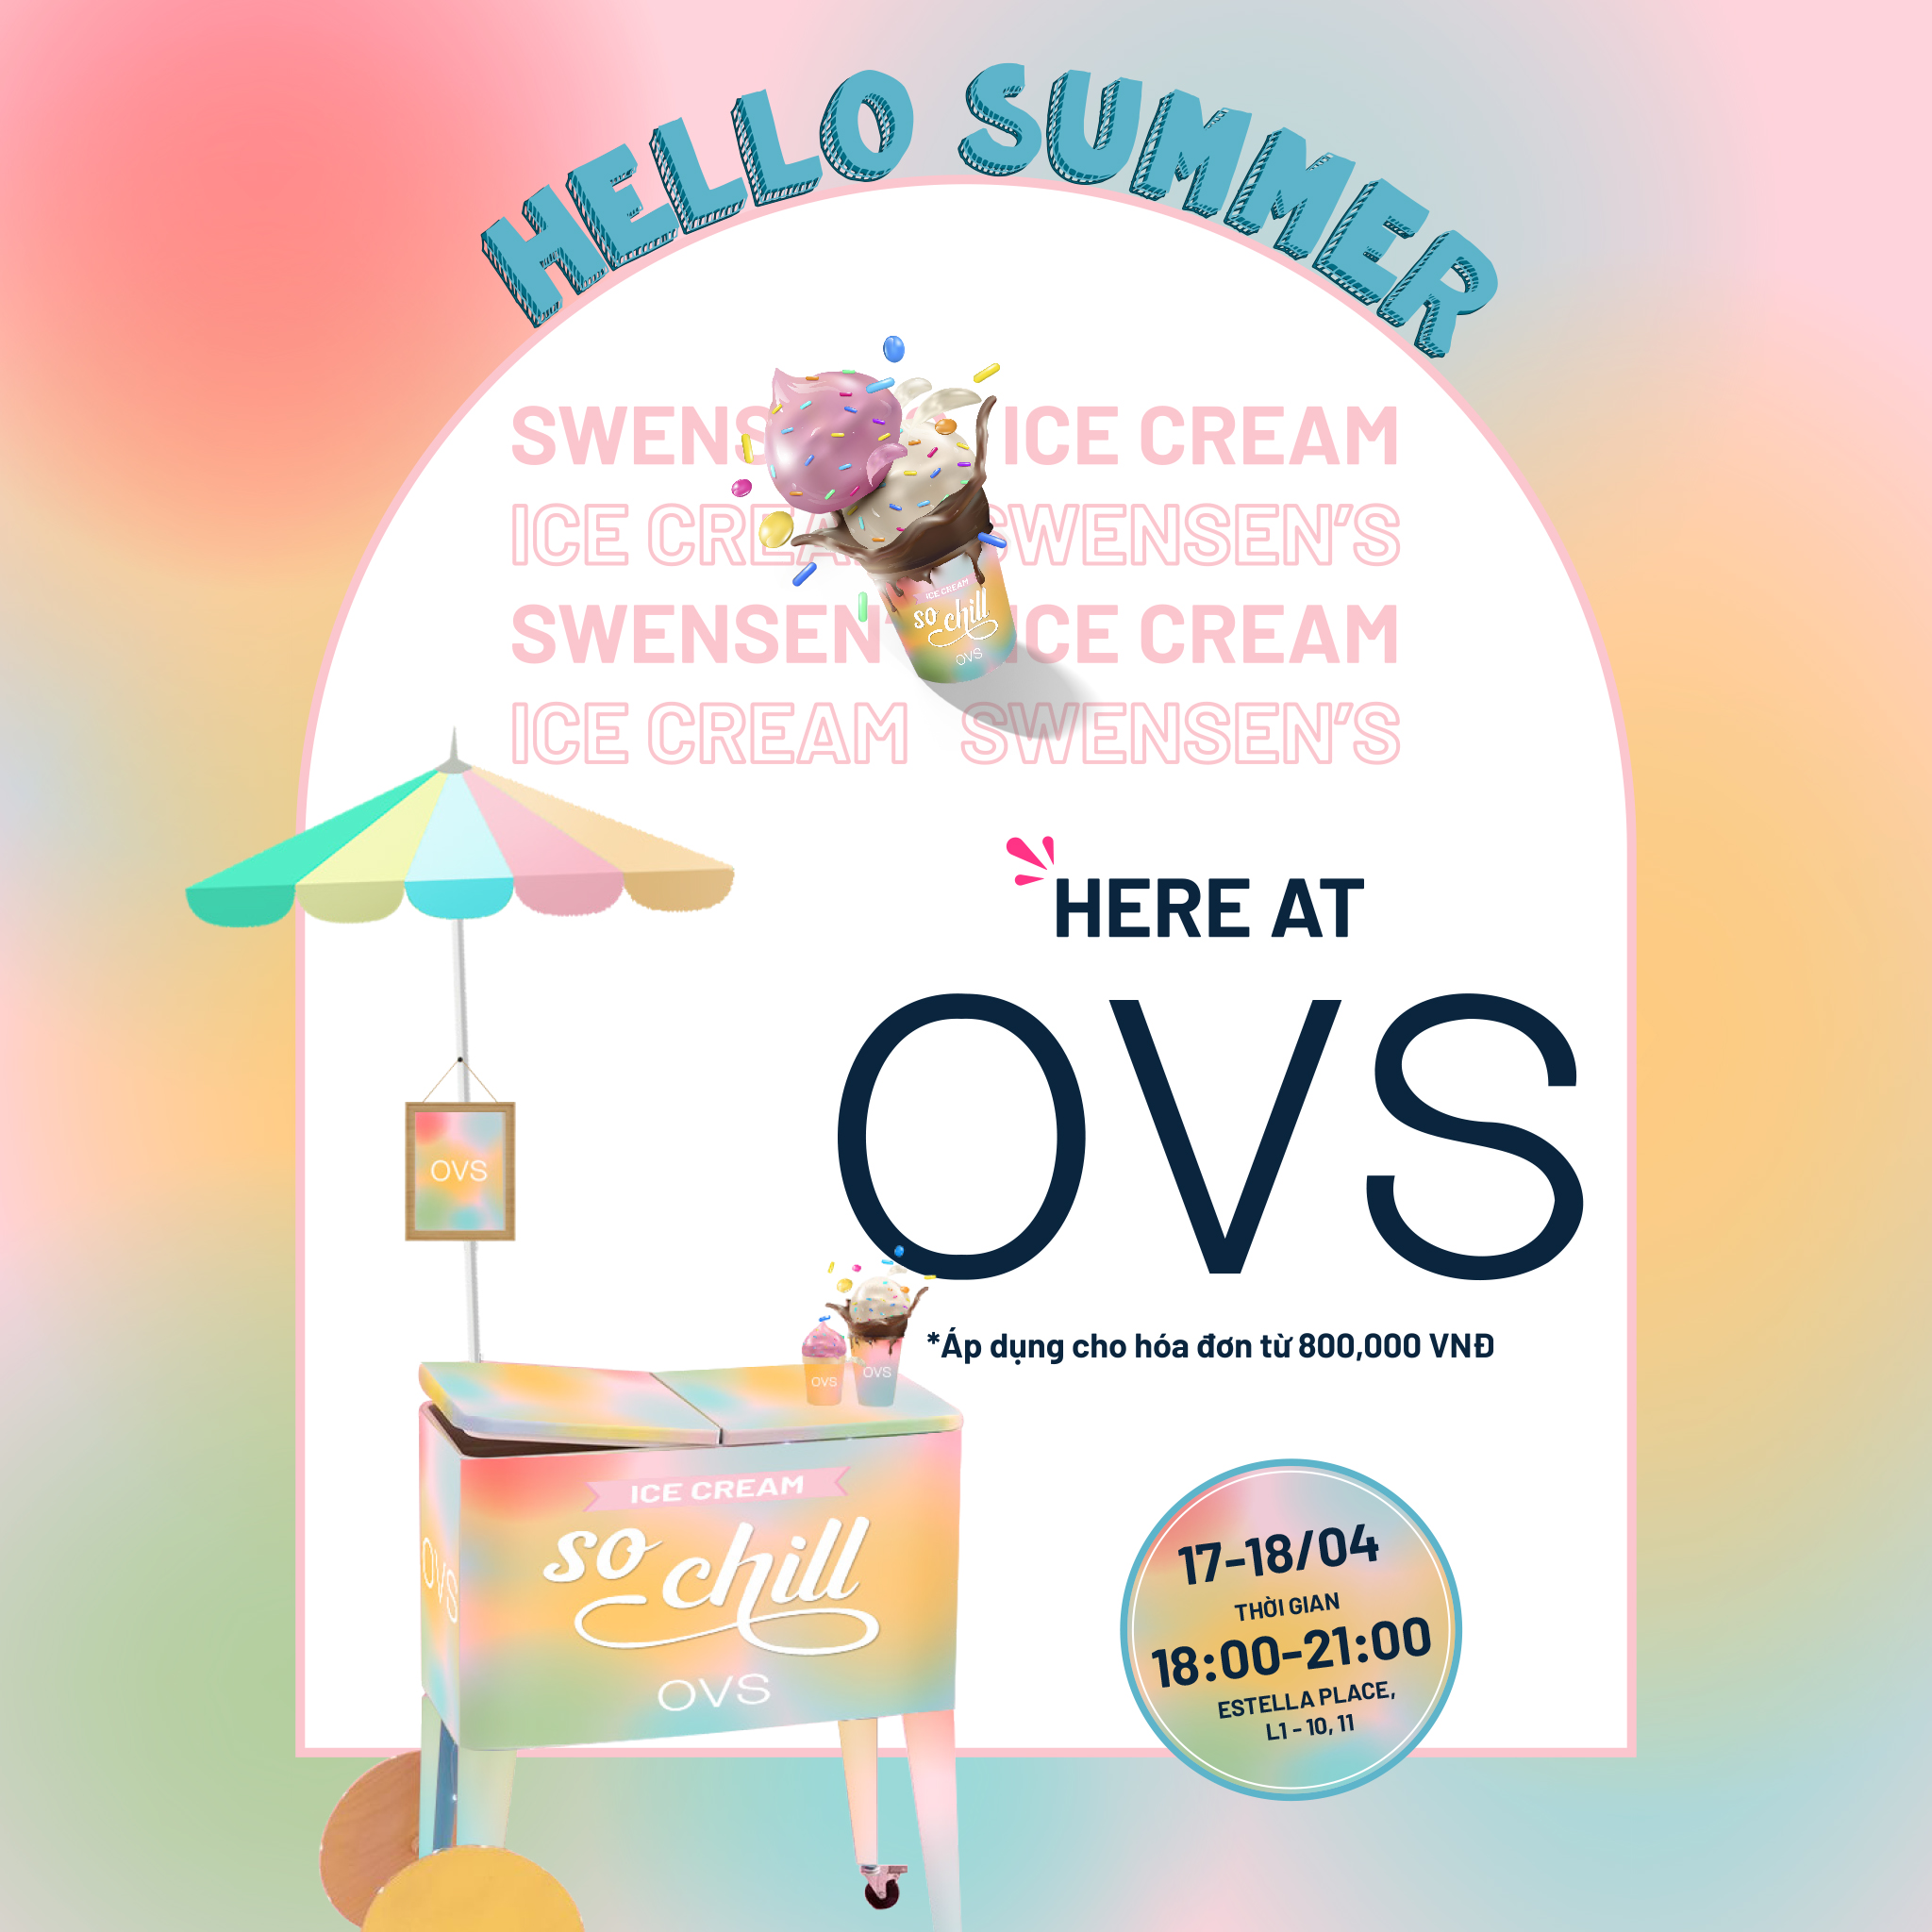 🍨 "SO CHILL" SUMMER - GET 1 SCOOP CREAM FOR BILL 800,000 VND AND PROVIDE ANY CHILDREN